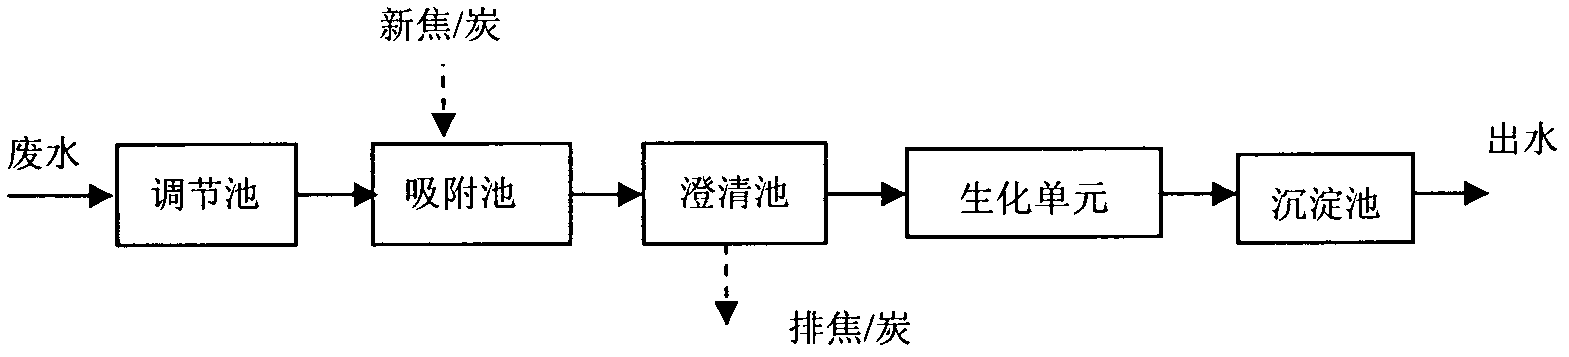 Process for treating coal chemical waste water